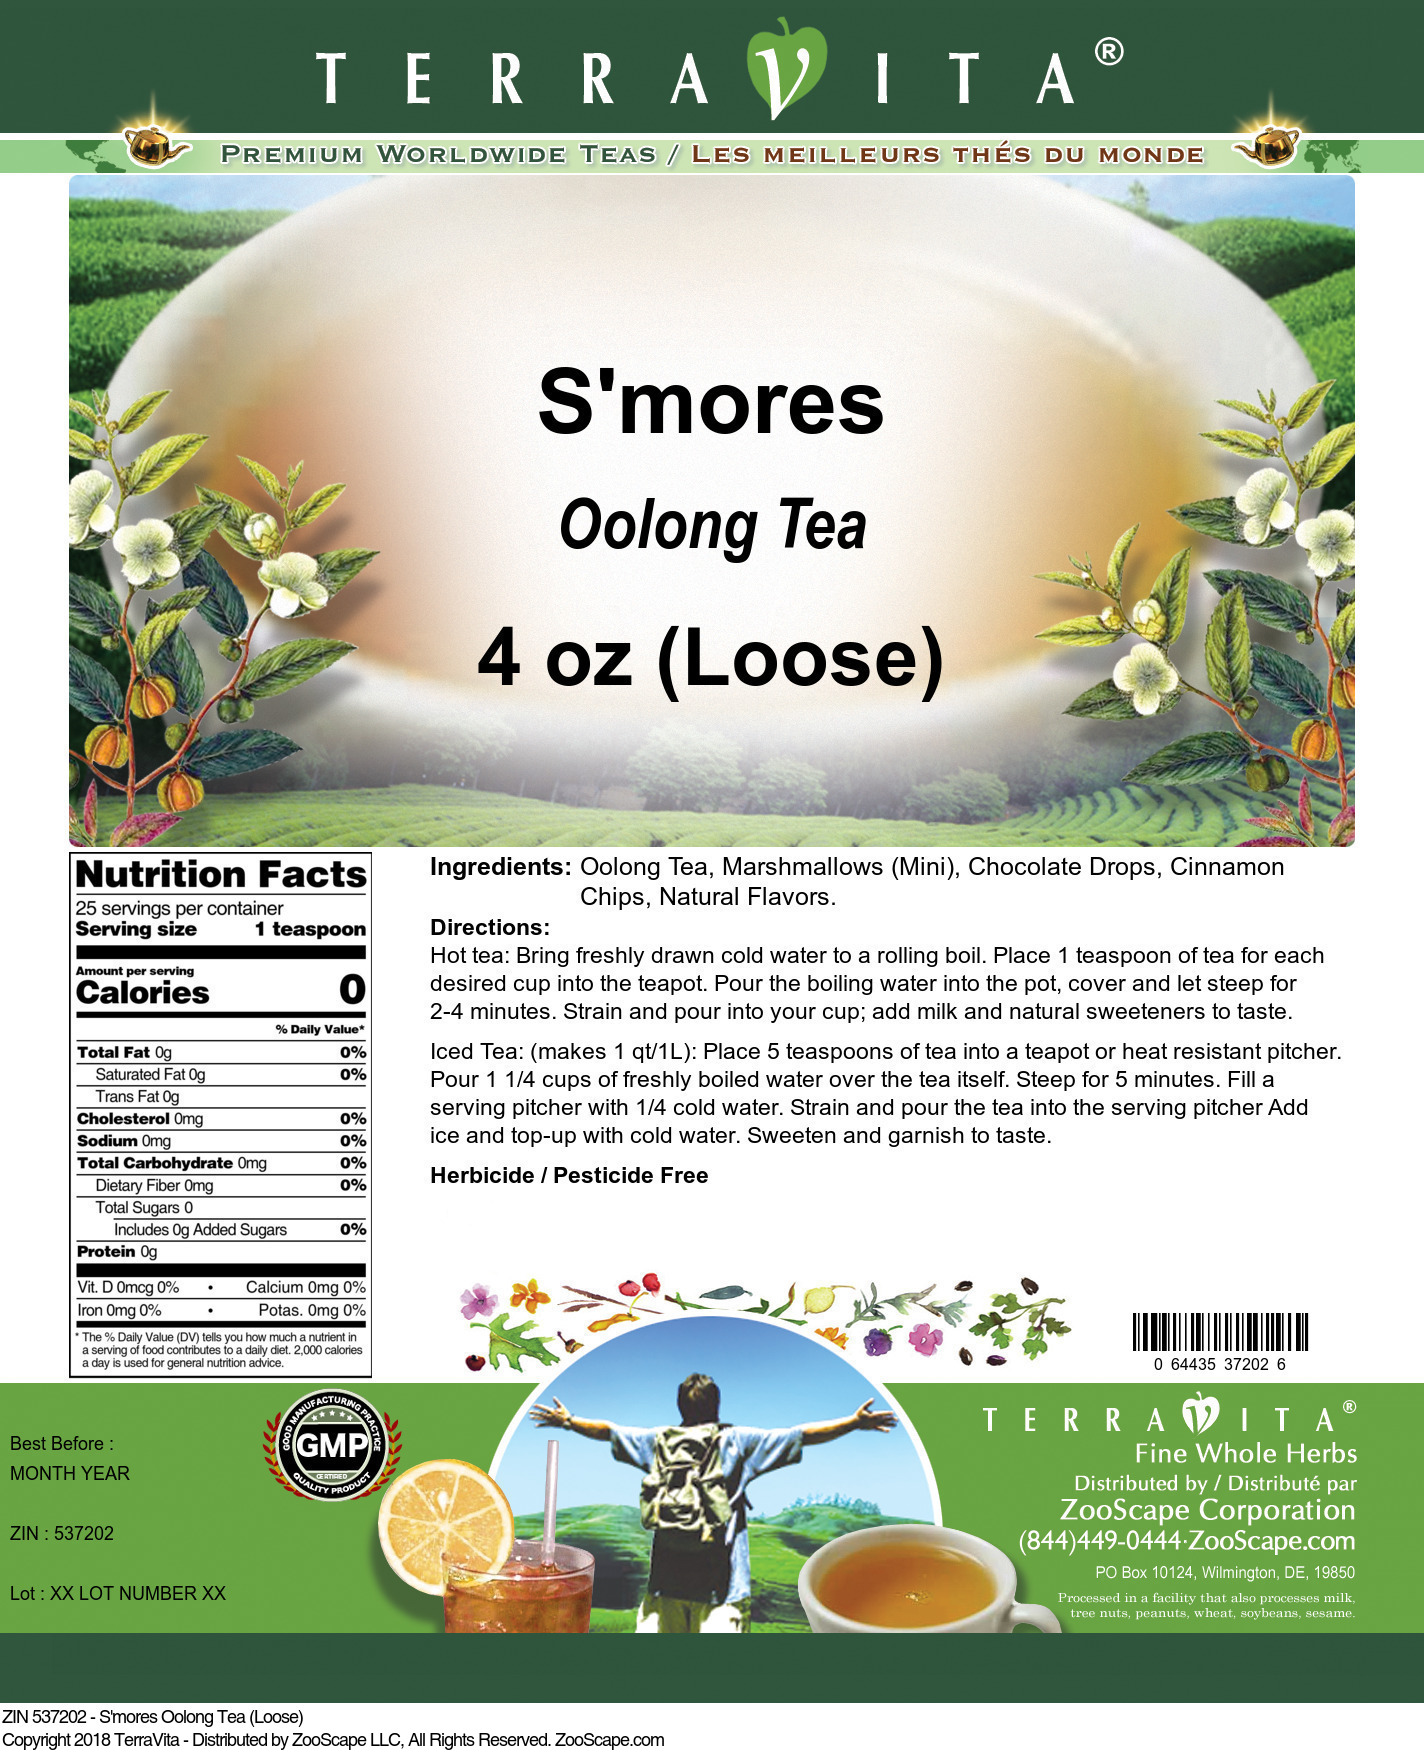 S'mores Oolong Tea (Loose) - Label